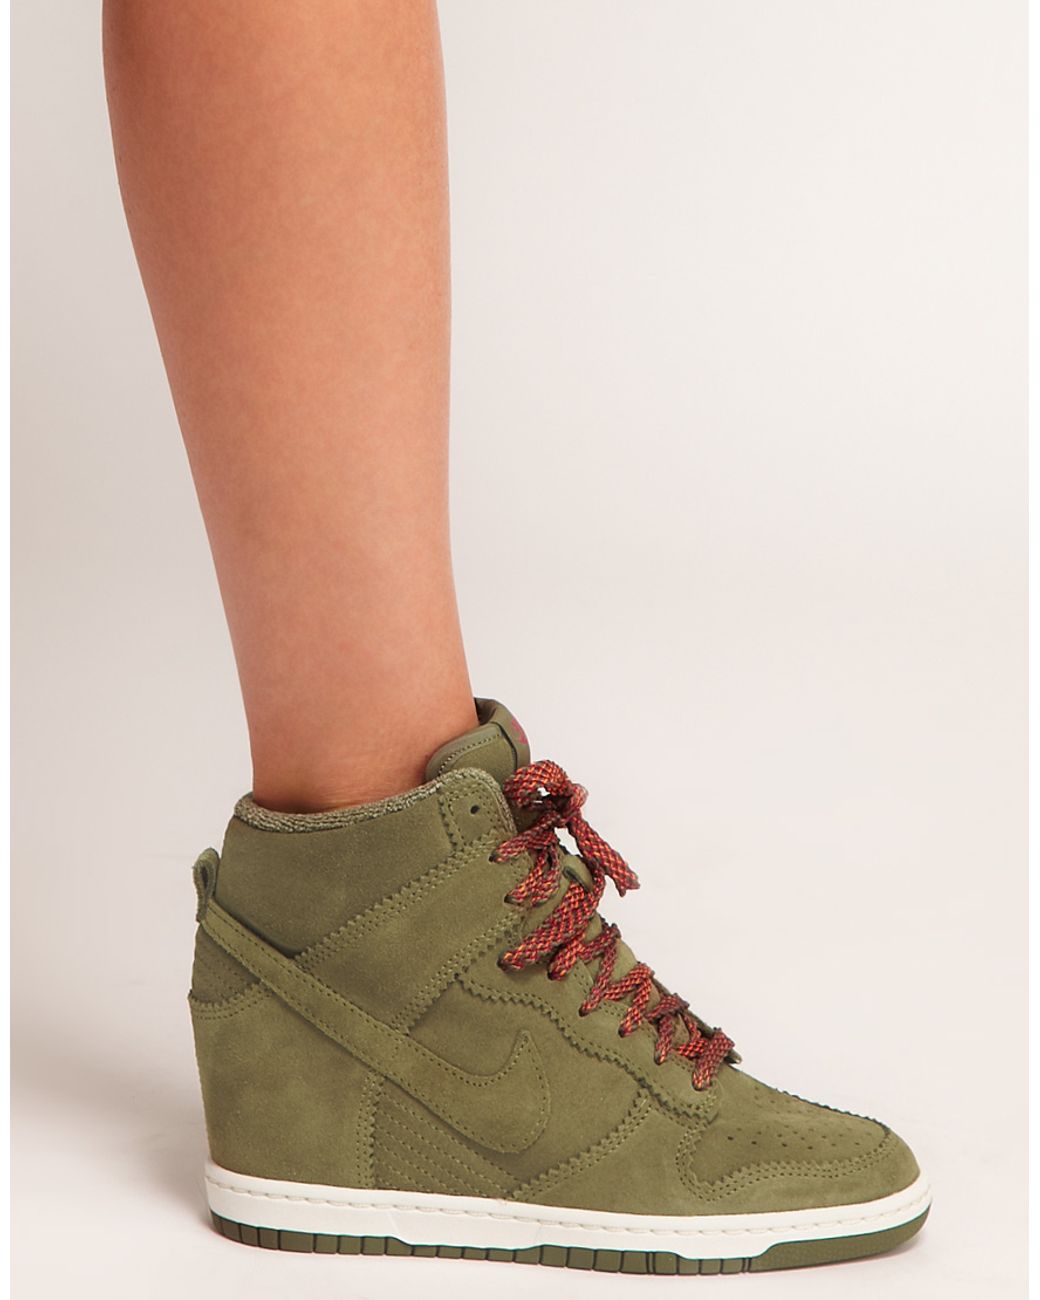 Nike Dunk Sky High Olive Wedge Trainers Natural | Lyst